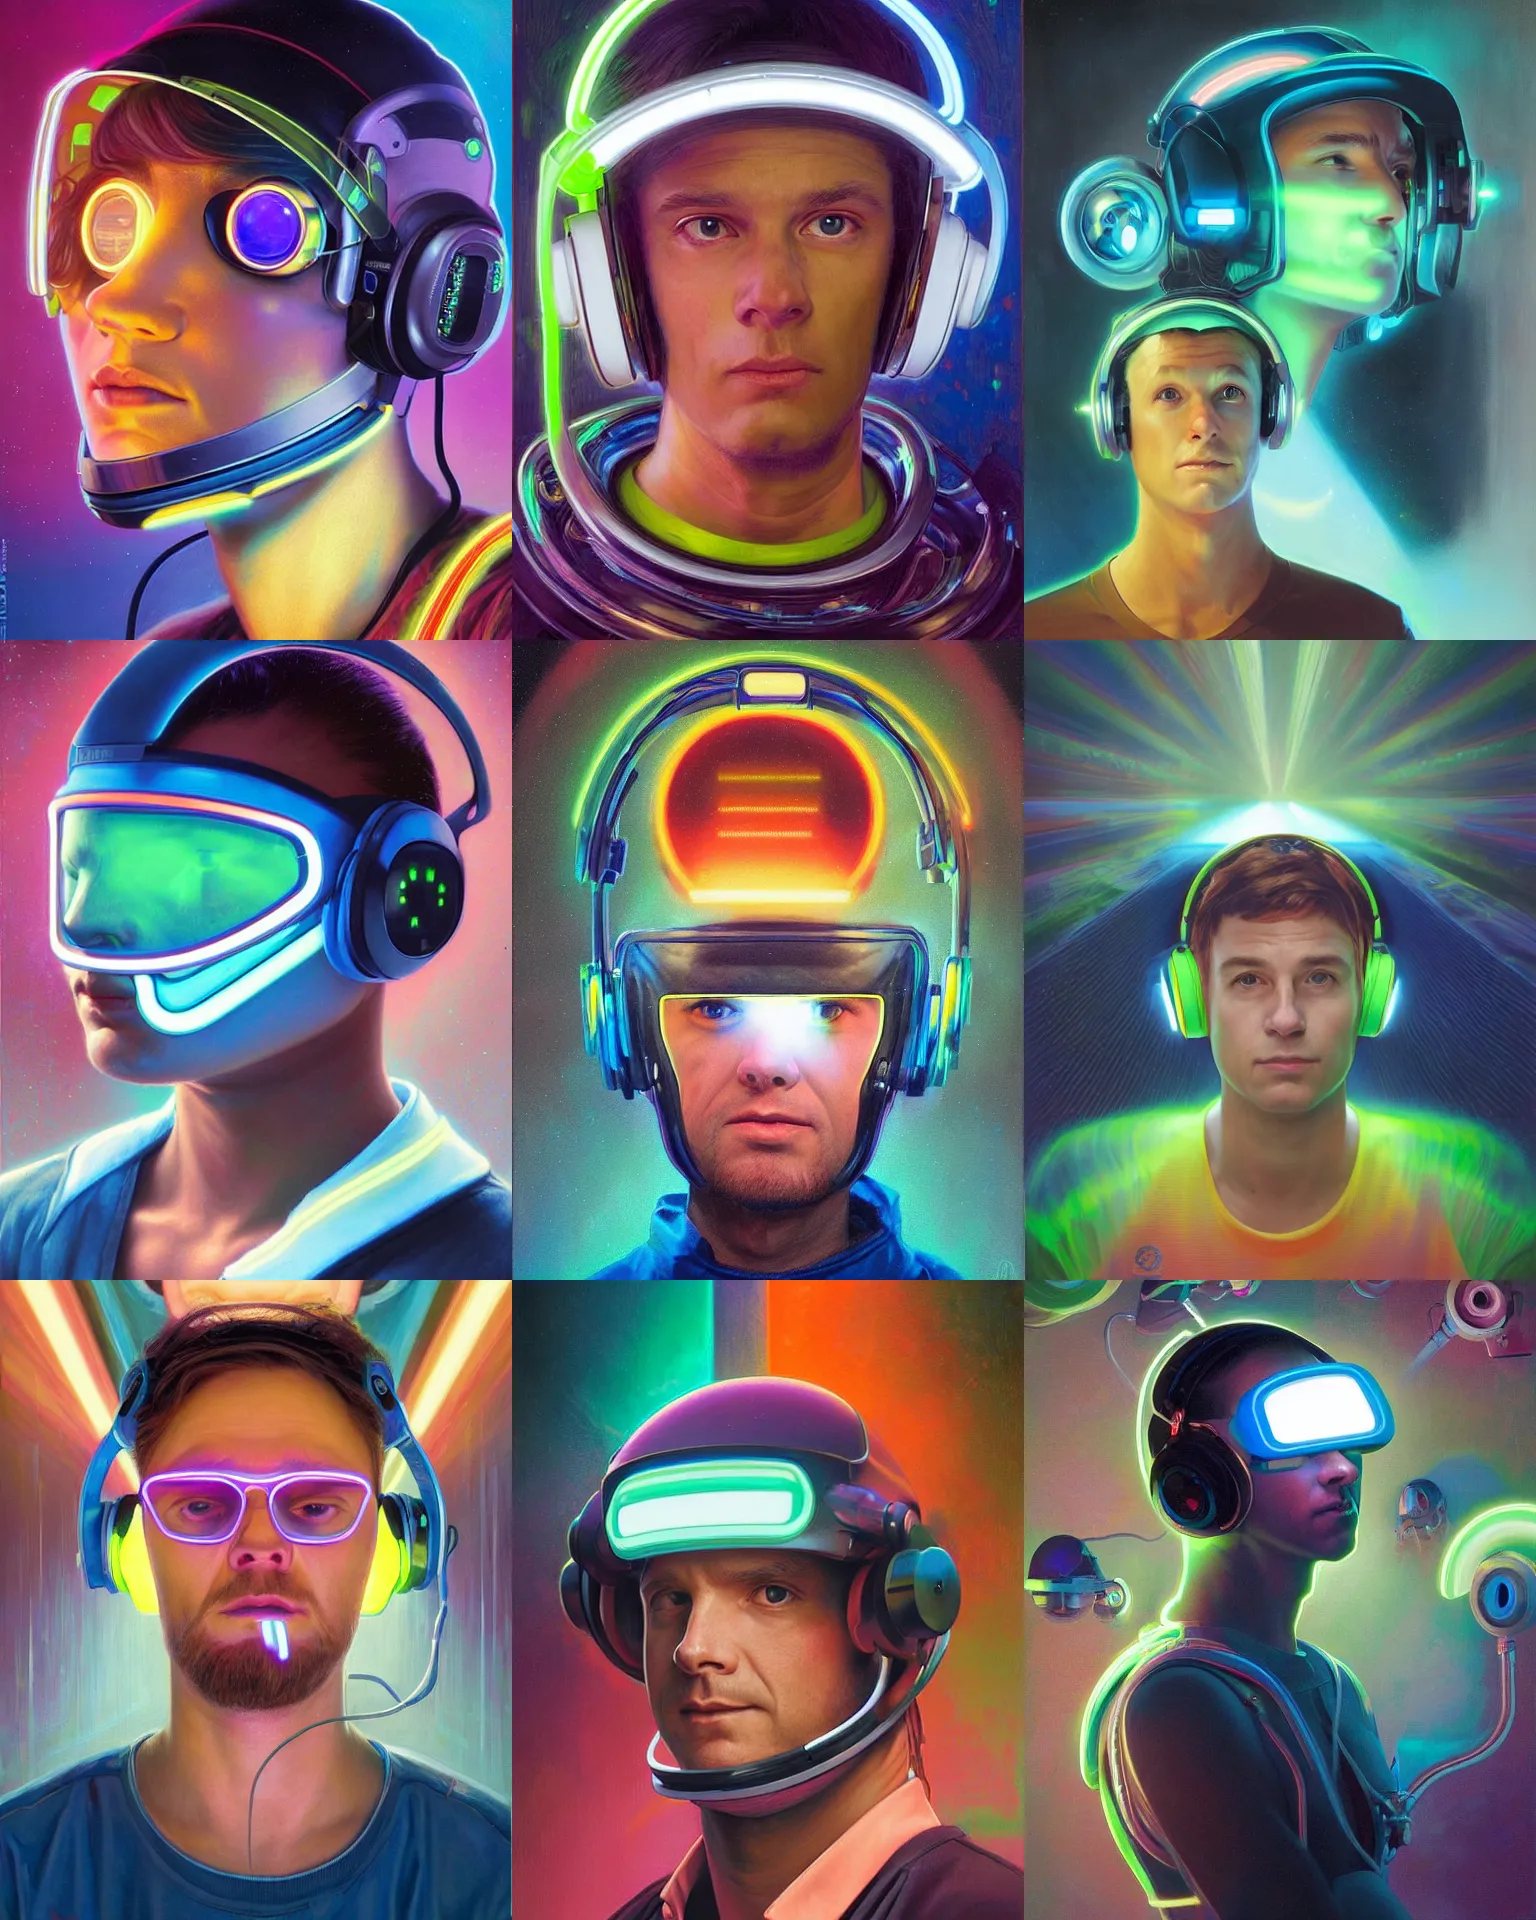 Prompt: future coder looking on, glowing visor over eyes and sleek neon headphones, neon accents, desaturated headshot portrait painting by donato giancola, dean cornwall, rhads, tom whalen, alex grey, alphonse mucha, astronaut cyberpunk electric fashion photography slight stubble